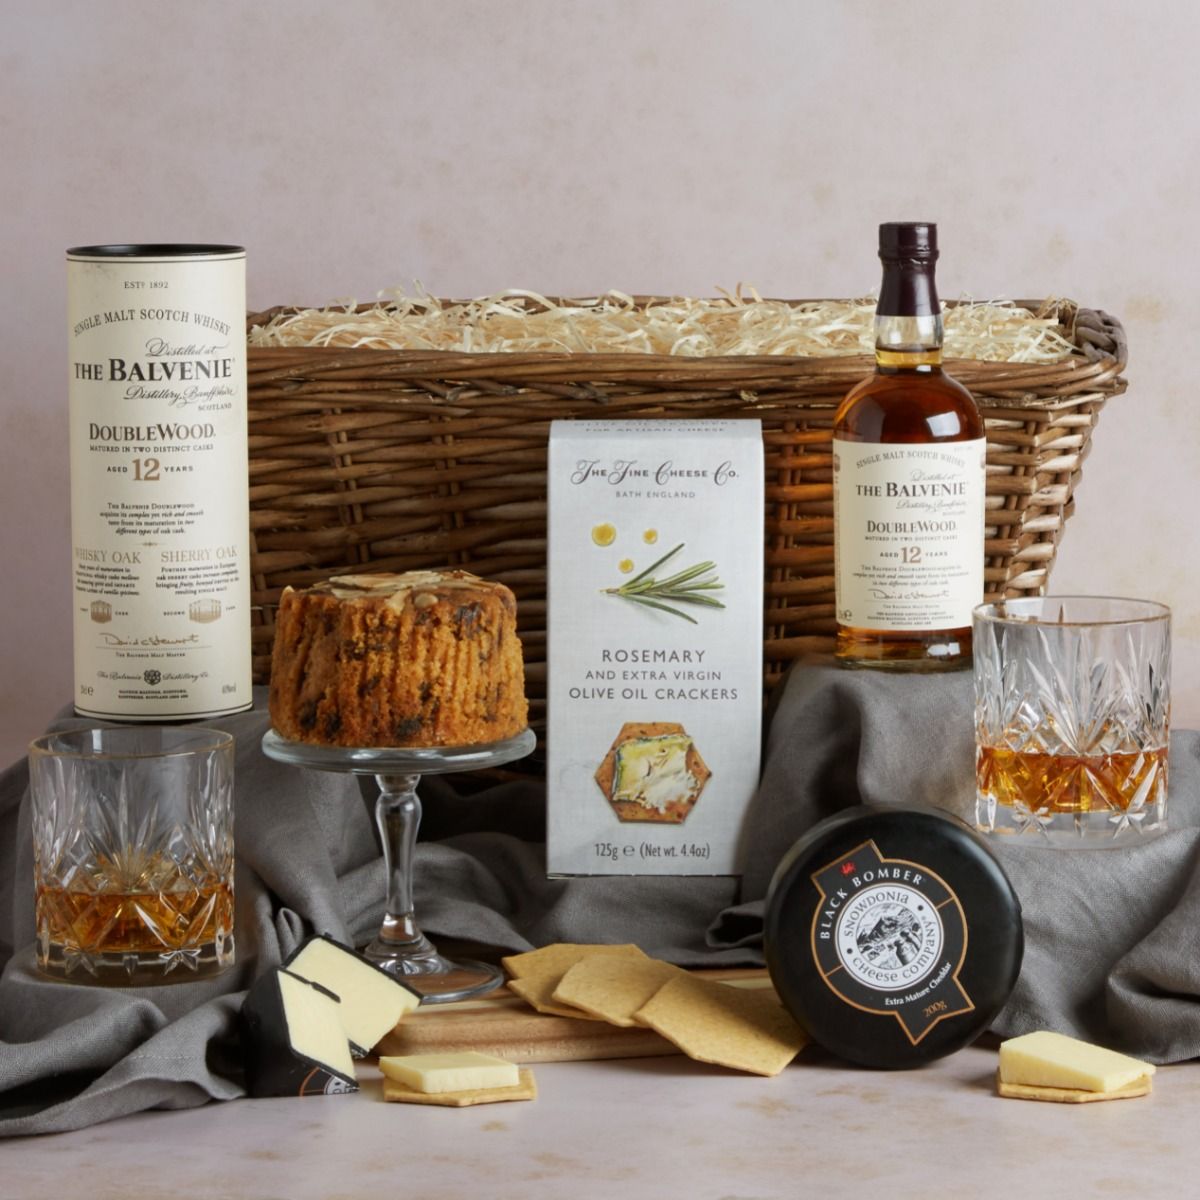 Premium whisky and food gift basket with contents on display and wicker basket